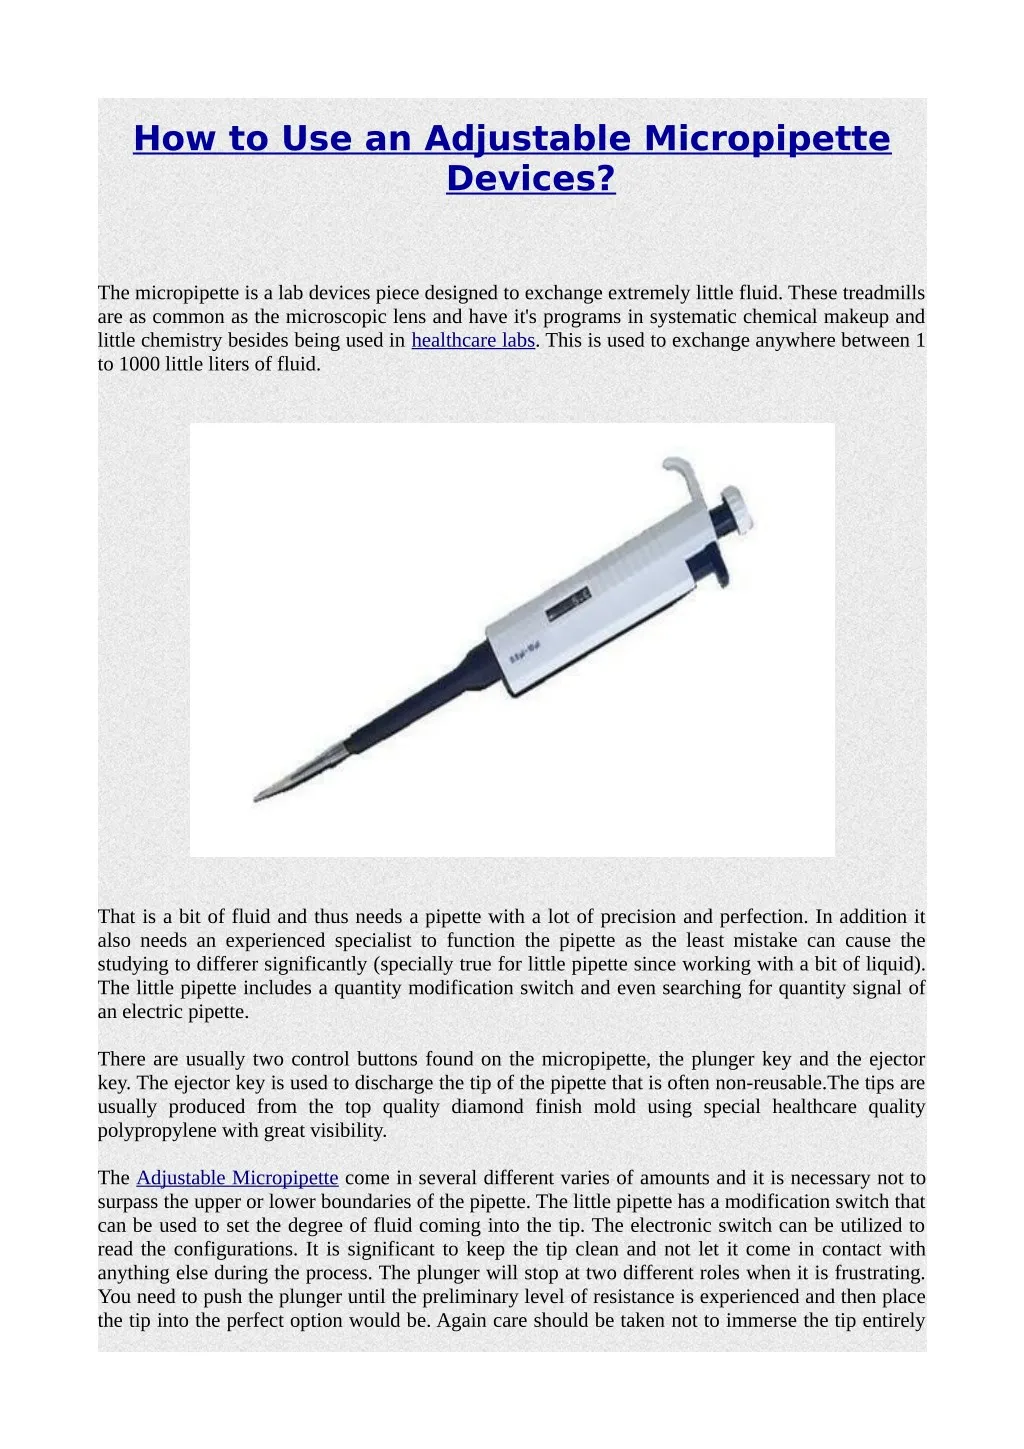 how to use an adjustable micropipette devices